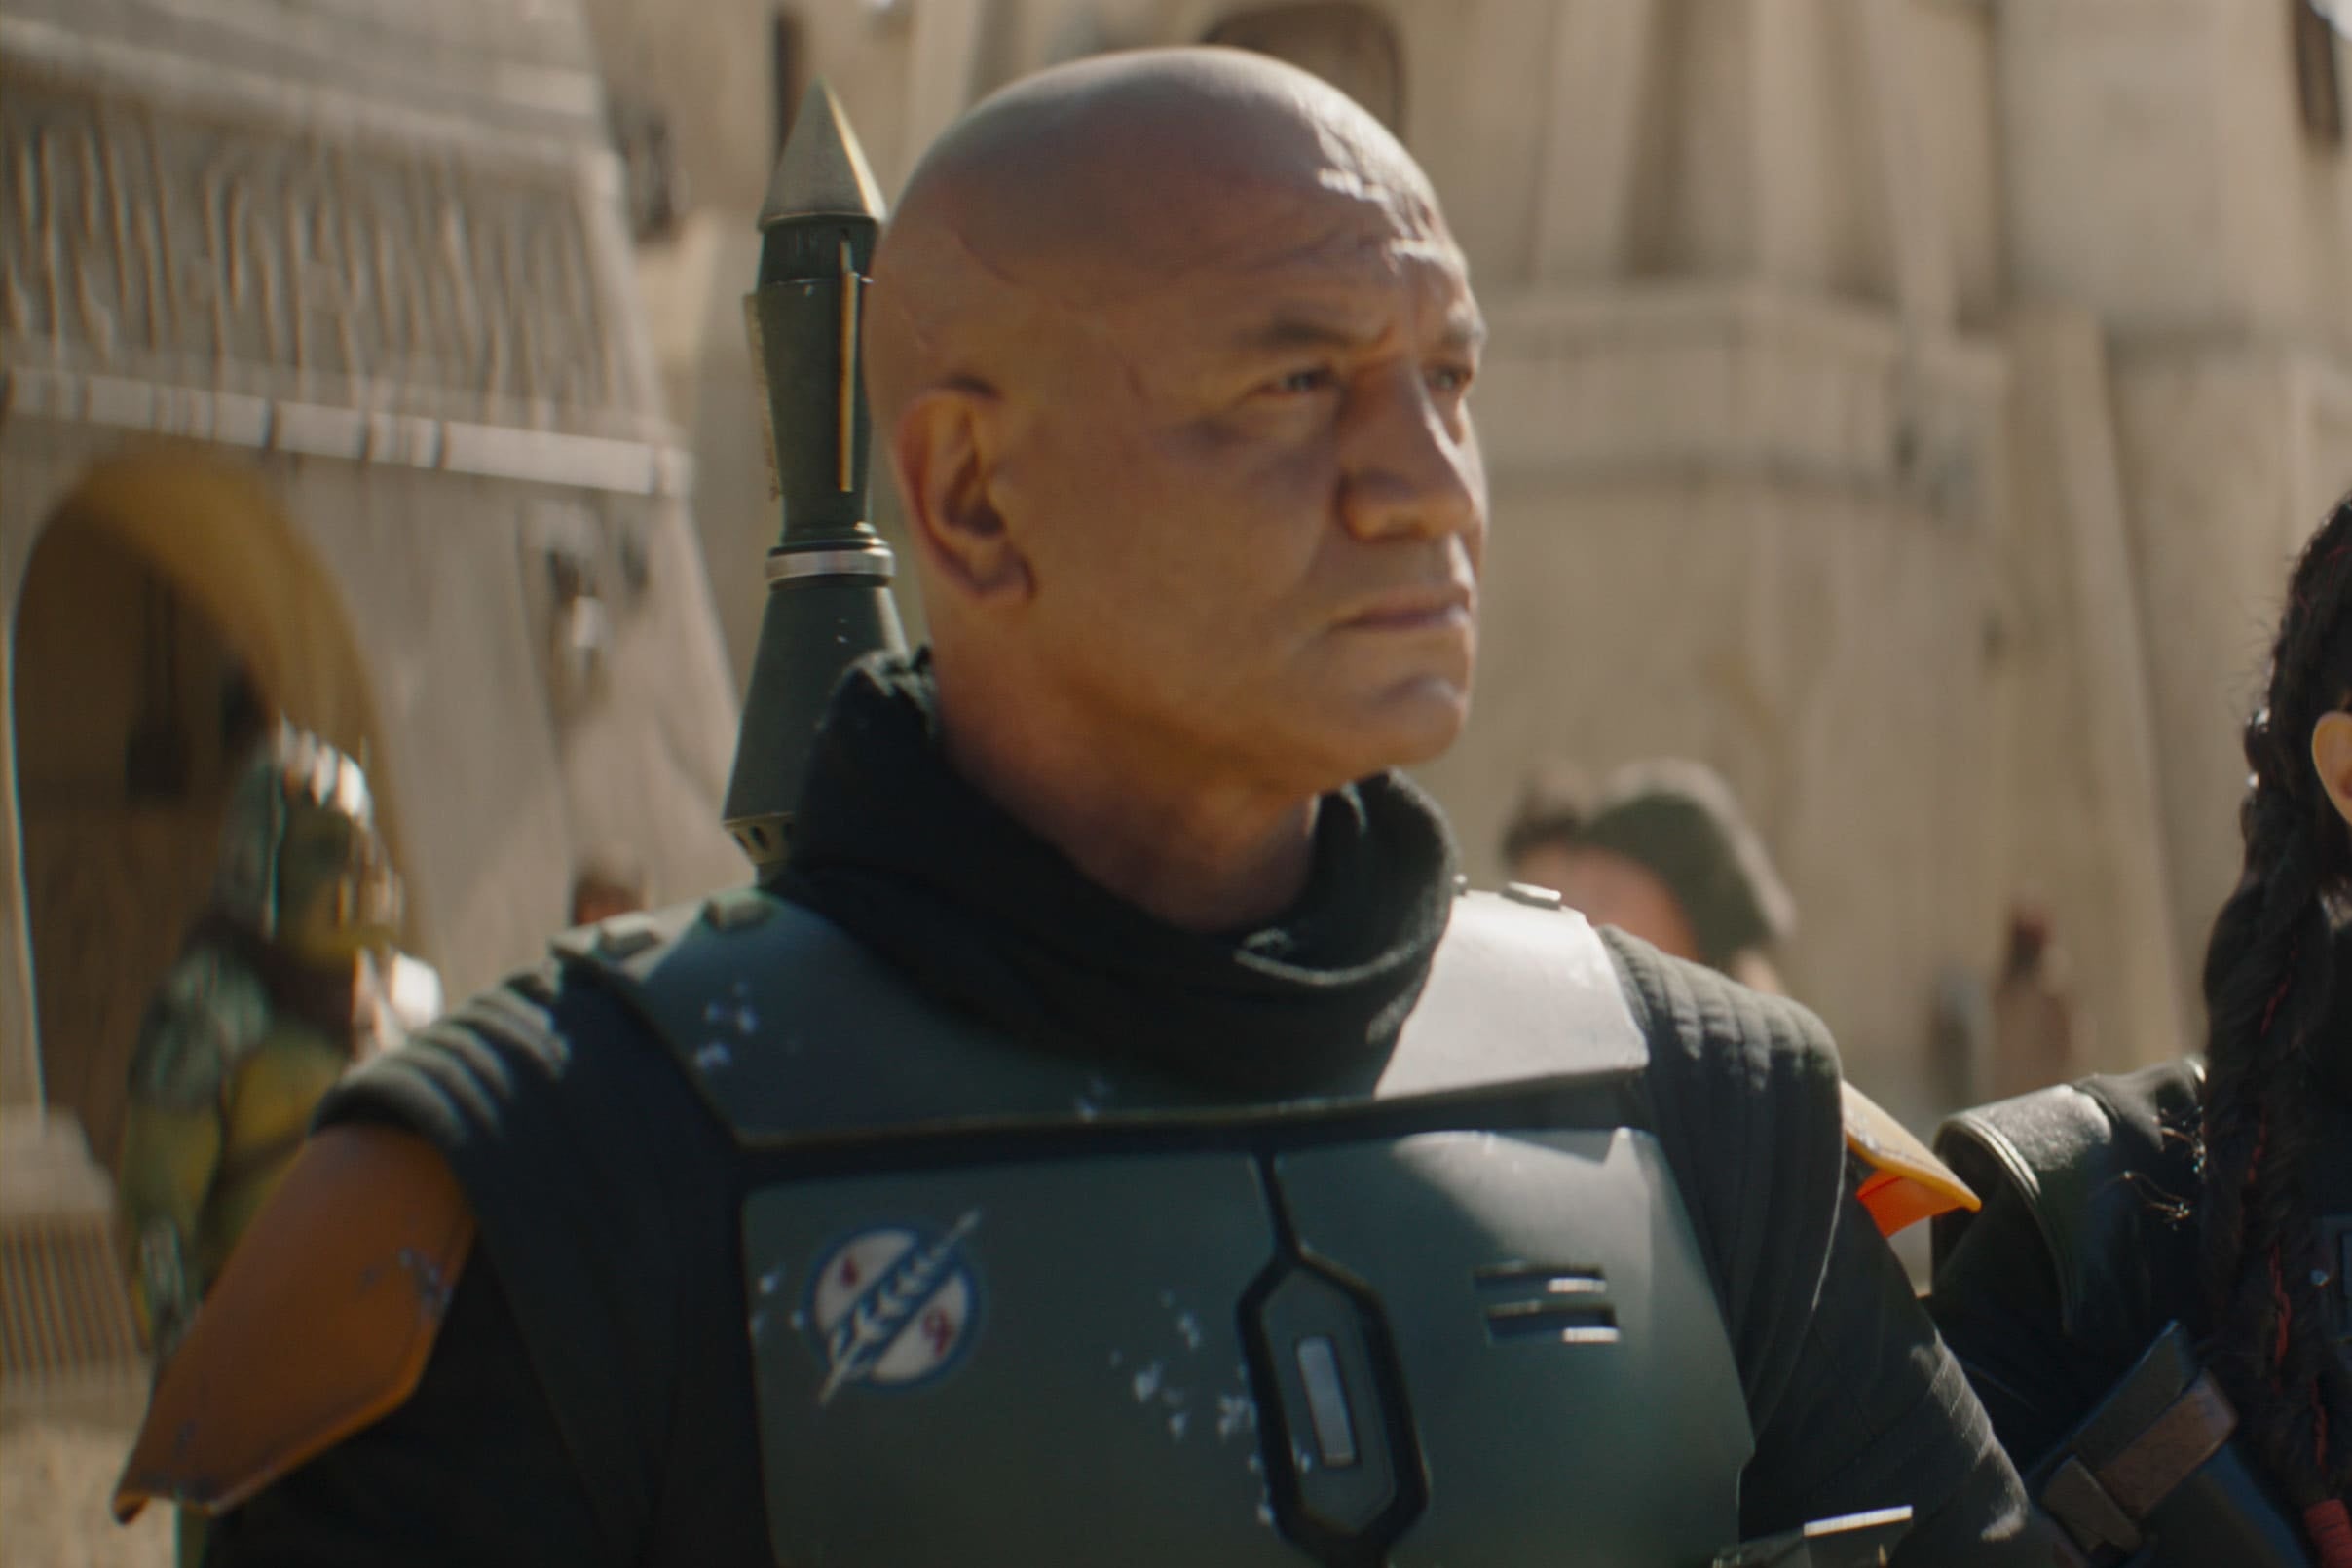 Temuera Morrison, as Boba Fett, stands in the foreground with Ming-Na Wen as Fennec Shand standing slightly behind him.  